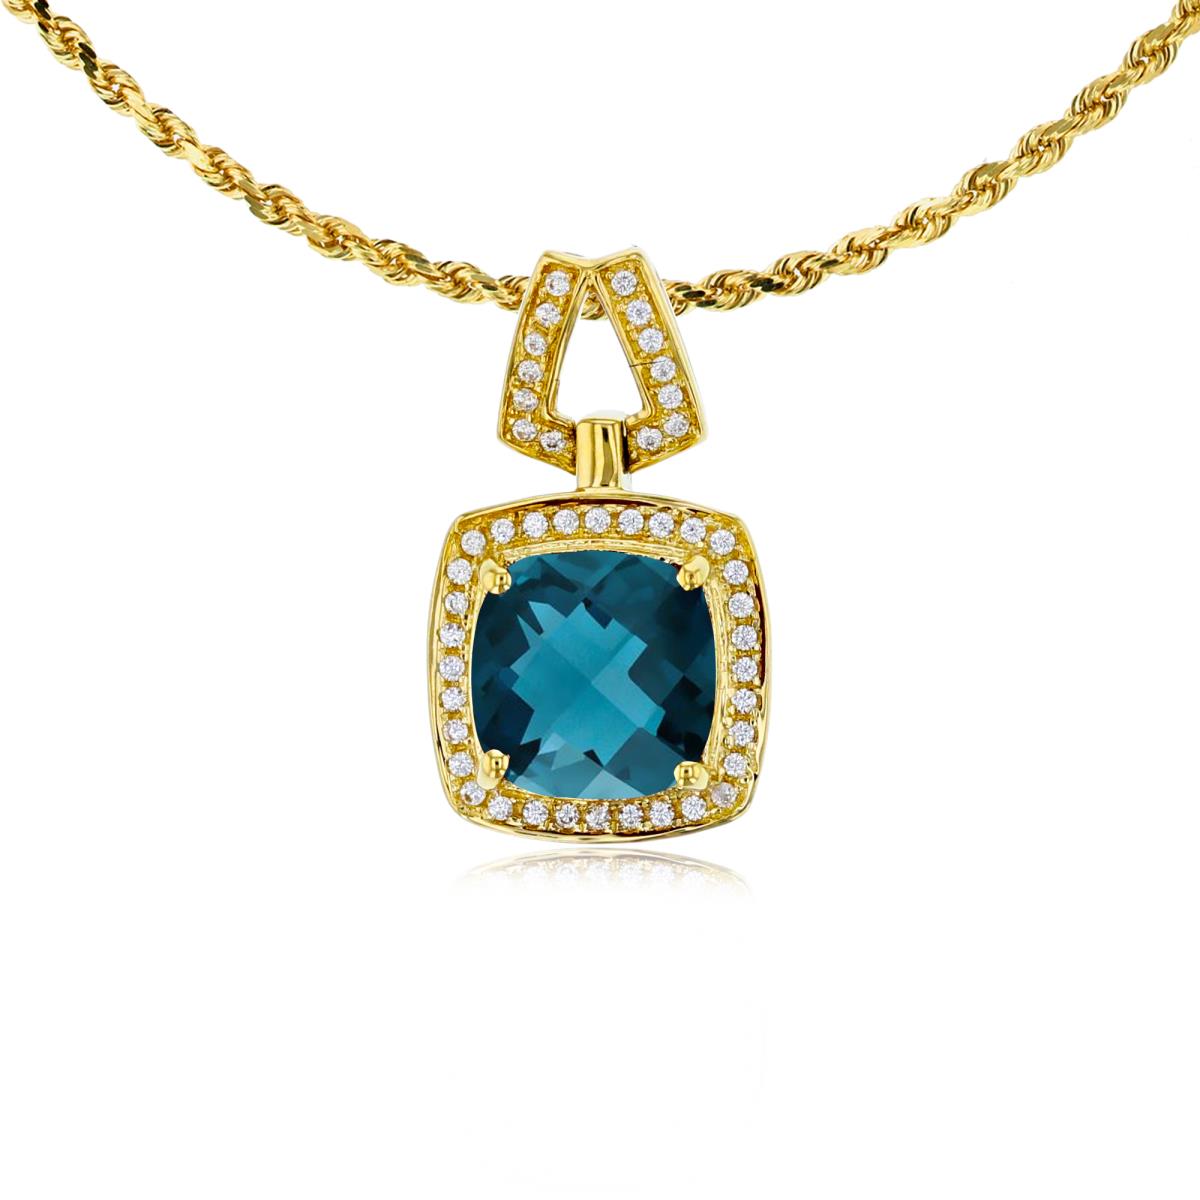 10K Yellow Gold 7mm Cushion London Blue Topaz & 0.10 CTTW Diamond Halo 18" Rope Chain Necklace